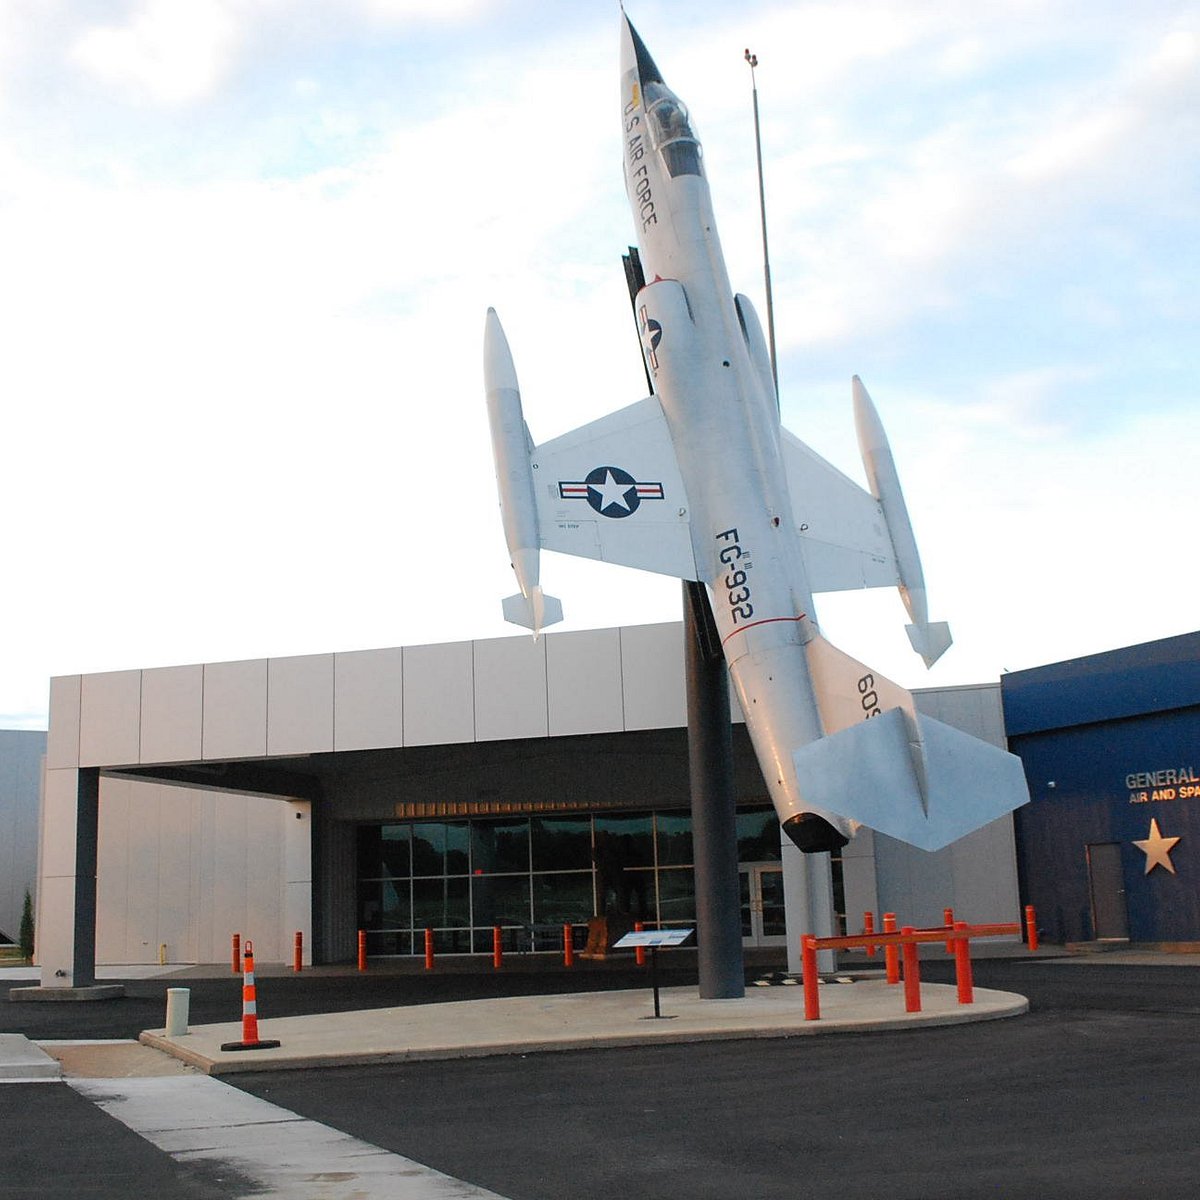 Oklahoma's own: three reasons to visit the Stafford Air and Space